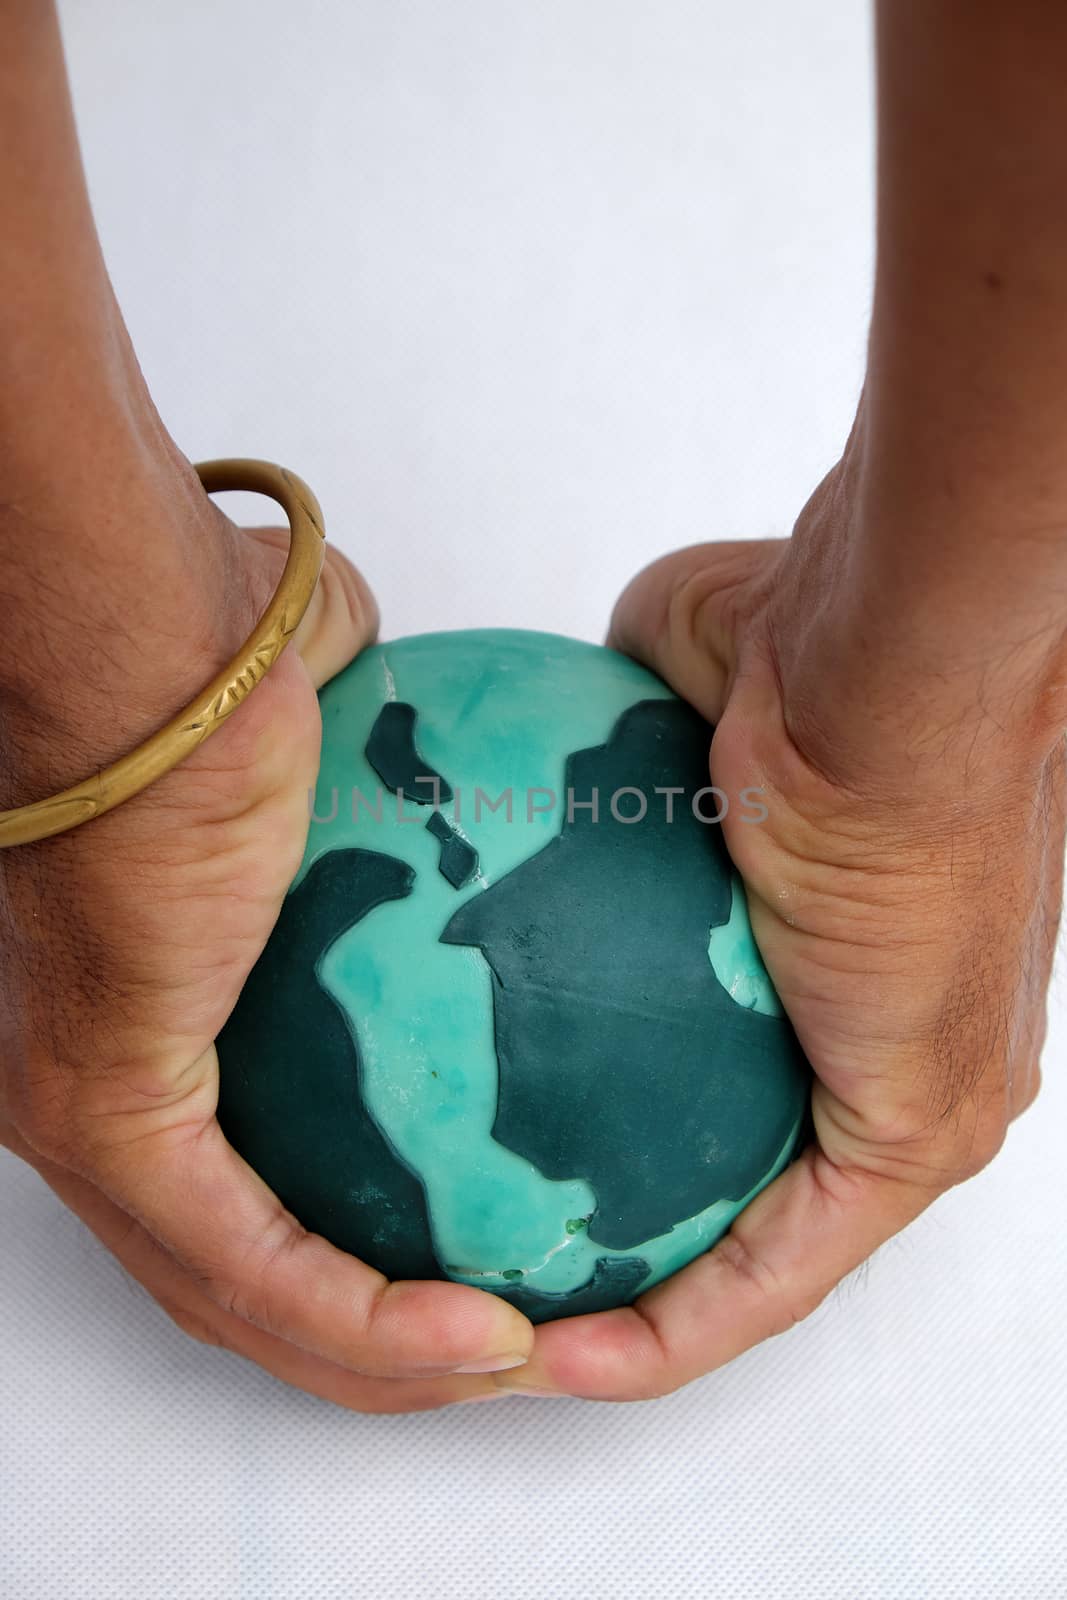 Concept for destroy the earth by human hand on white background, human ruin green planet, is worldwide problem, can make climate change, disaster, damaged environment